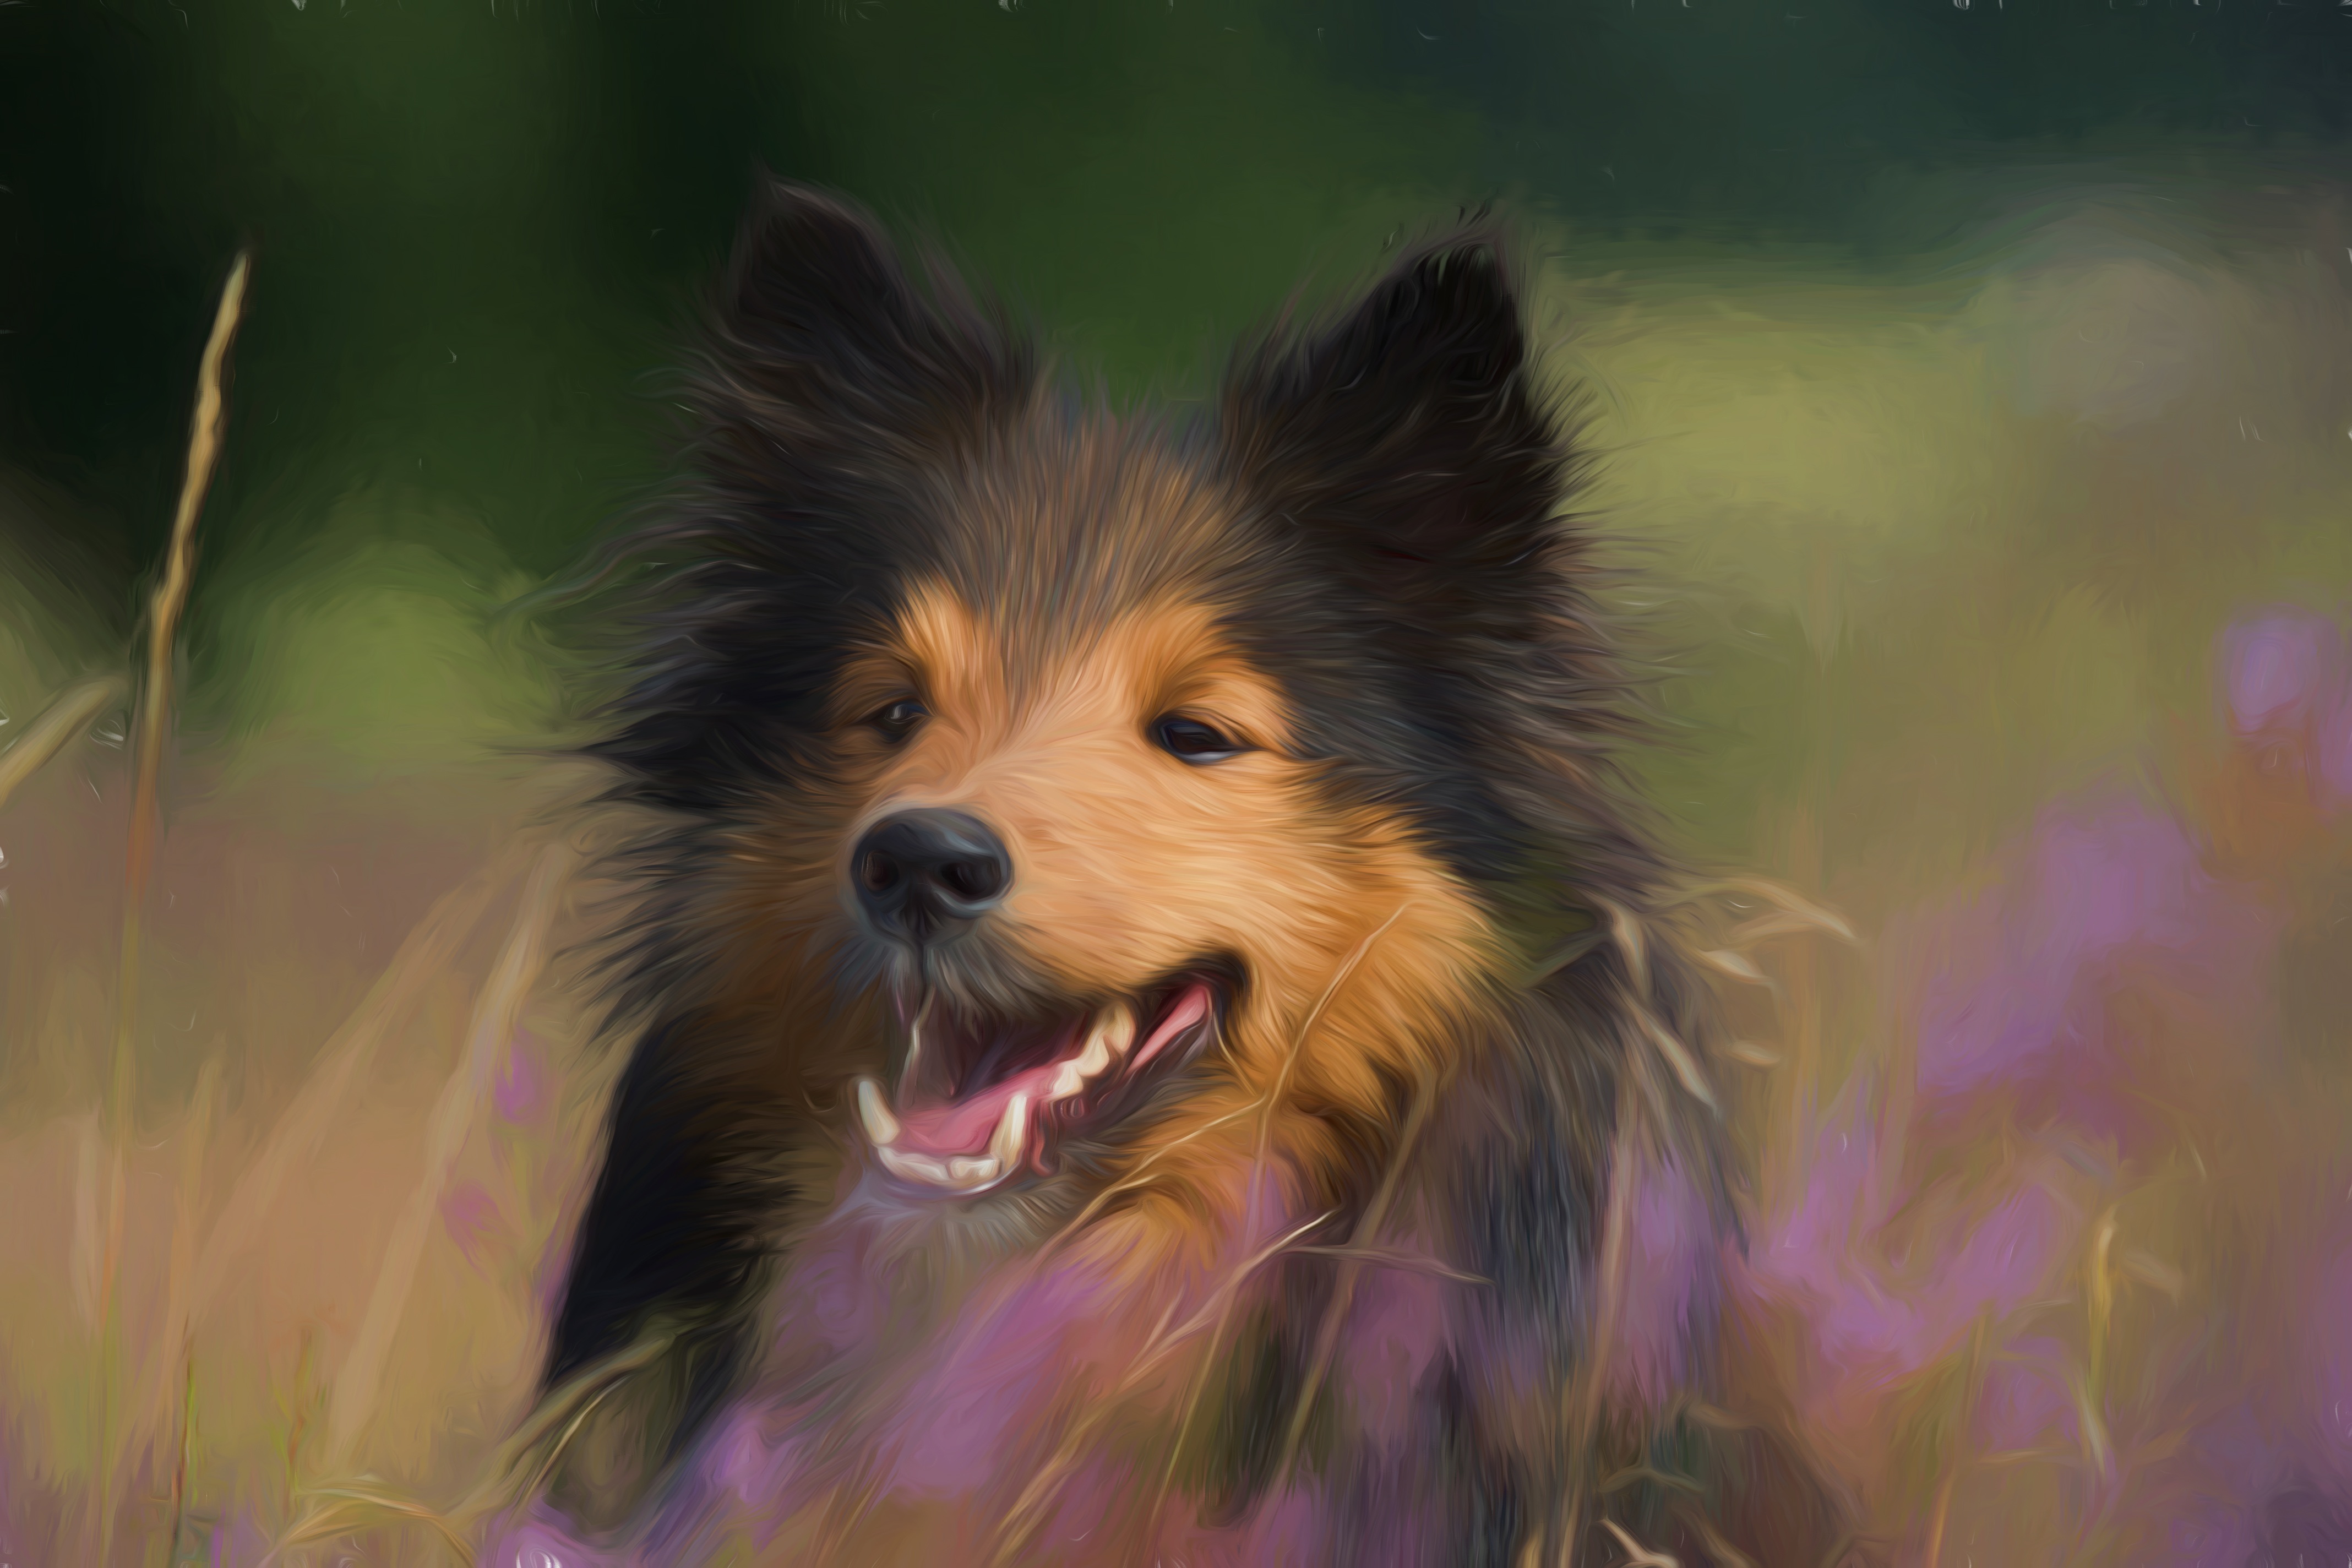 Shetland Sheepdog or Sheltie, done with an oil paint fillter by Hans Benn